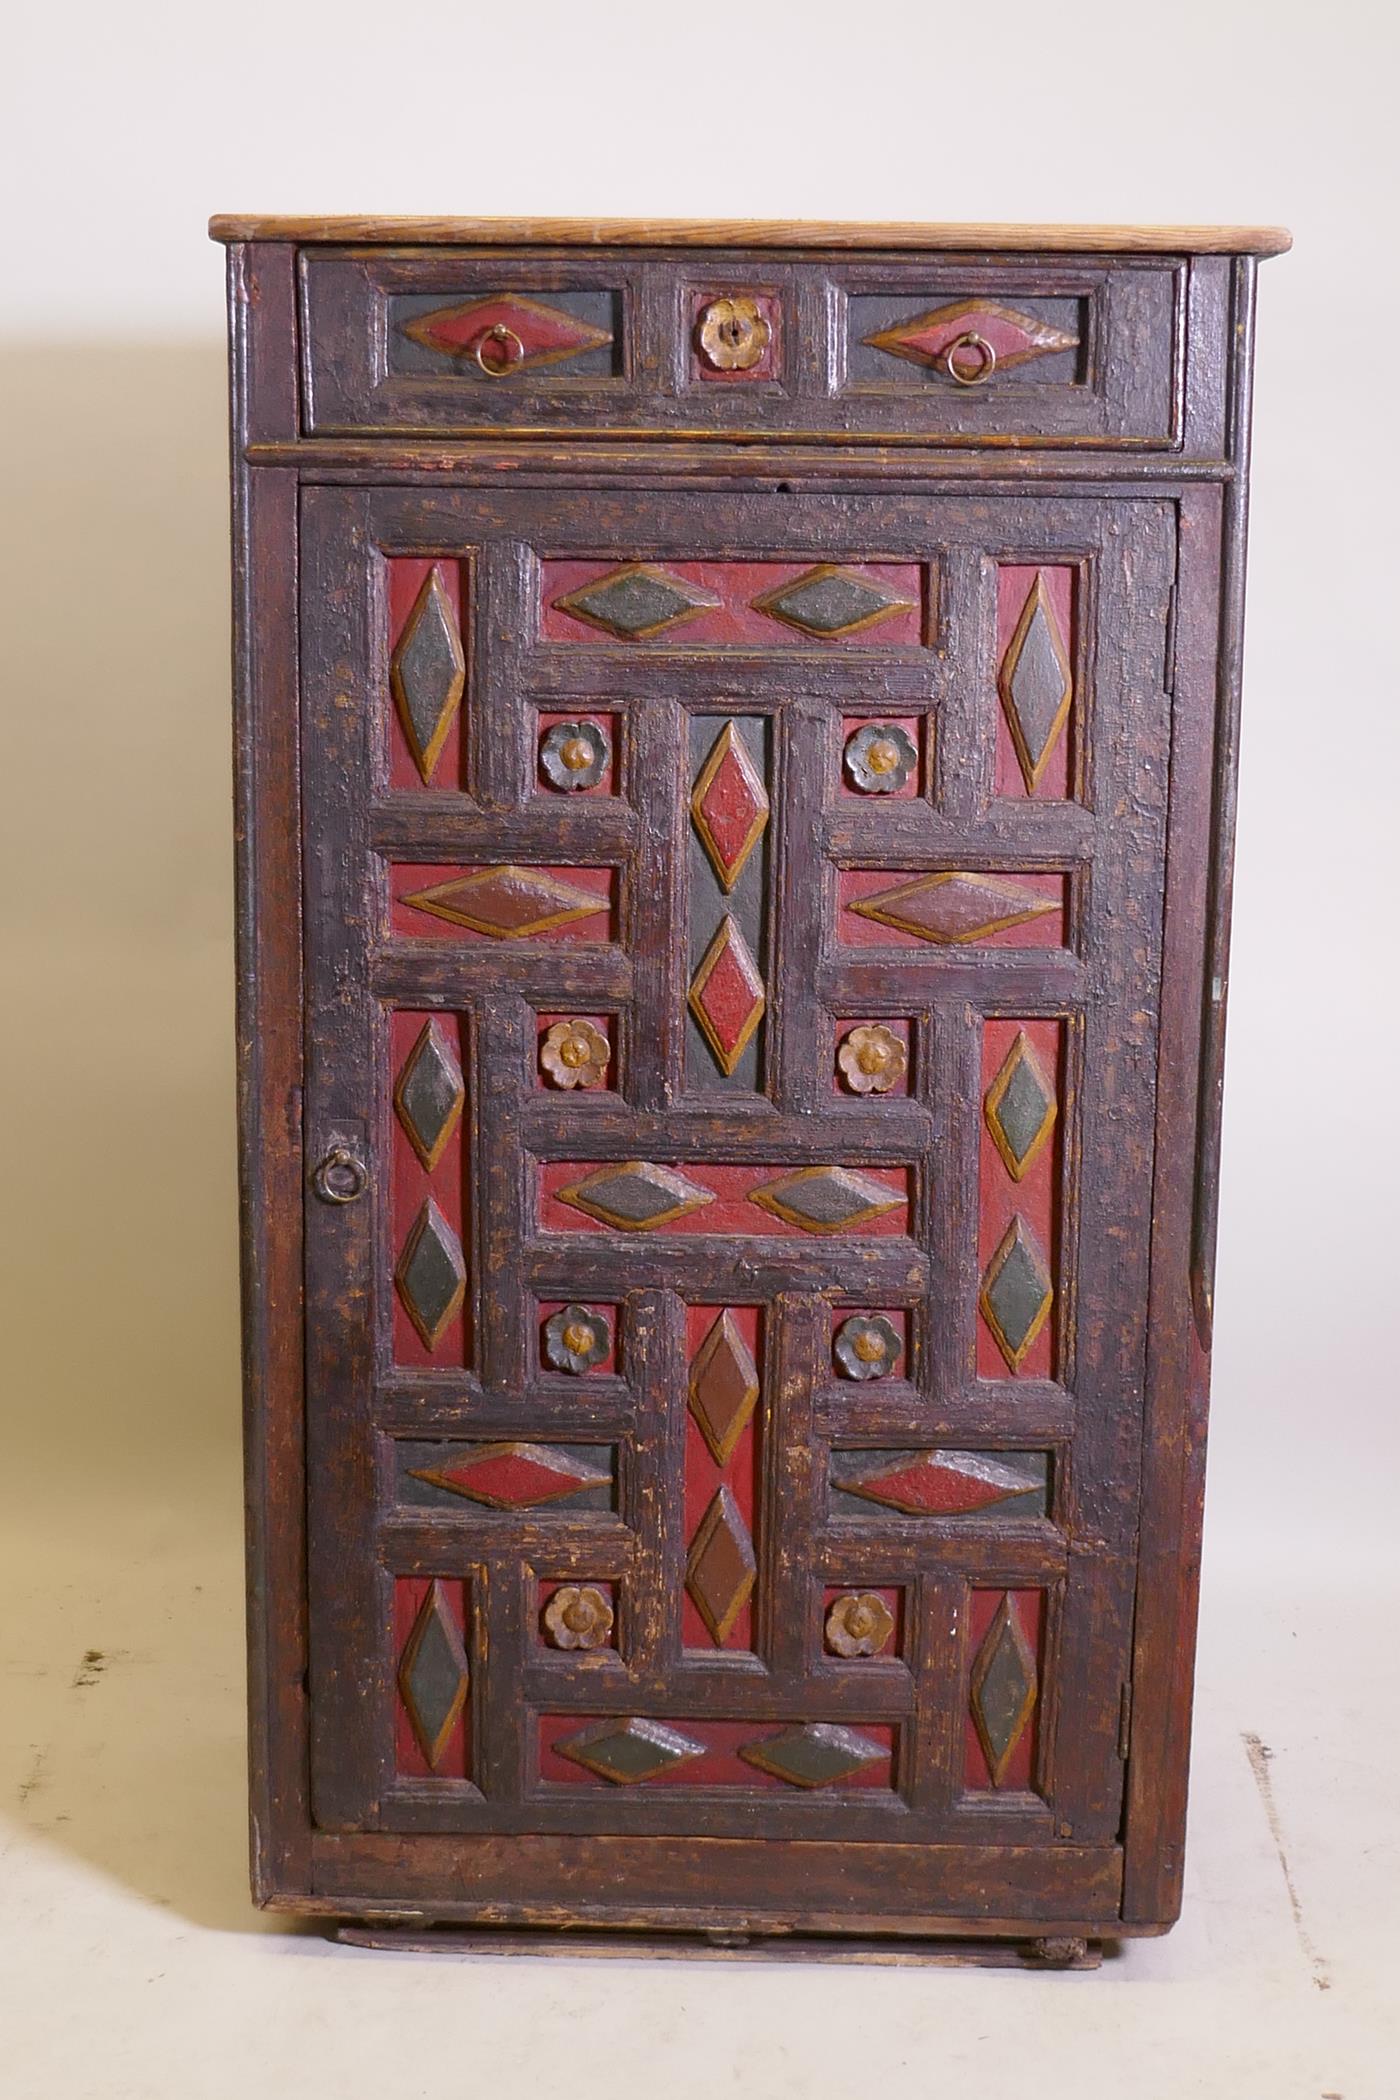 An early C19th east European painted pine cupboard, with moulded decoration, single drawer over - Image 2 of 4